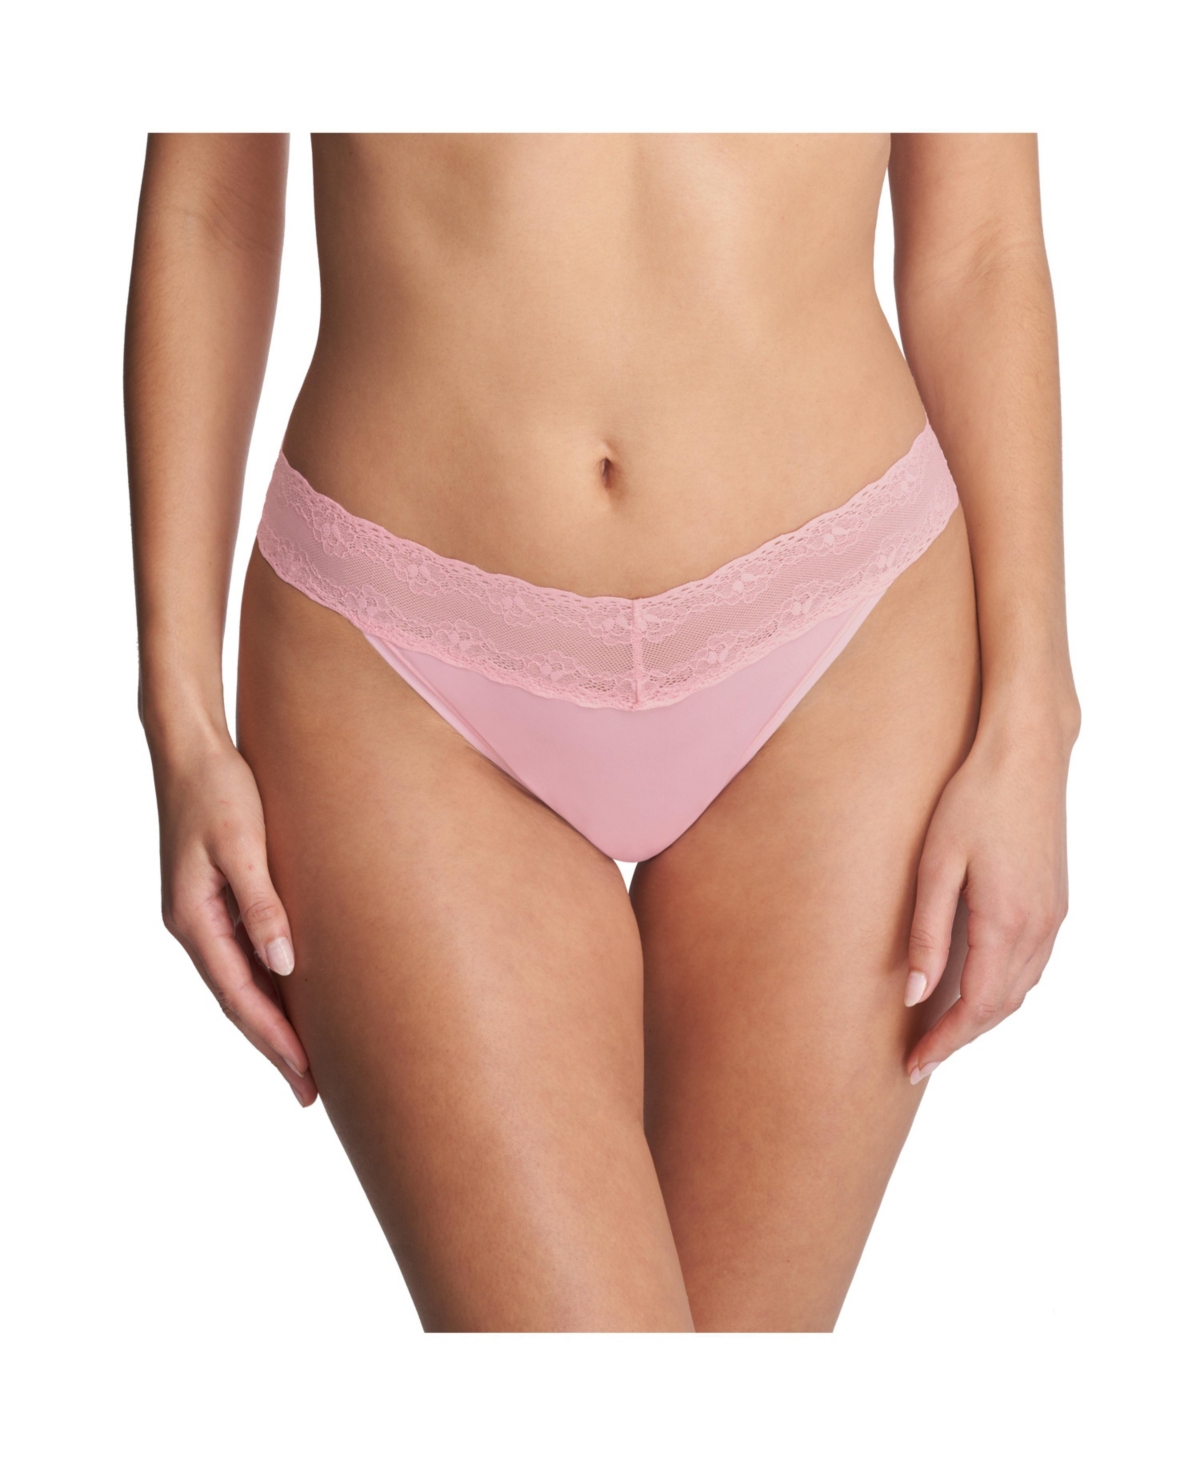 Women's Bliss Perfection One Thong 3-Pack - Peony pink 3-pack